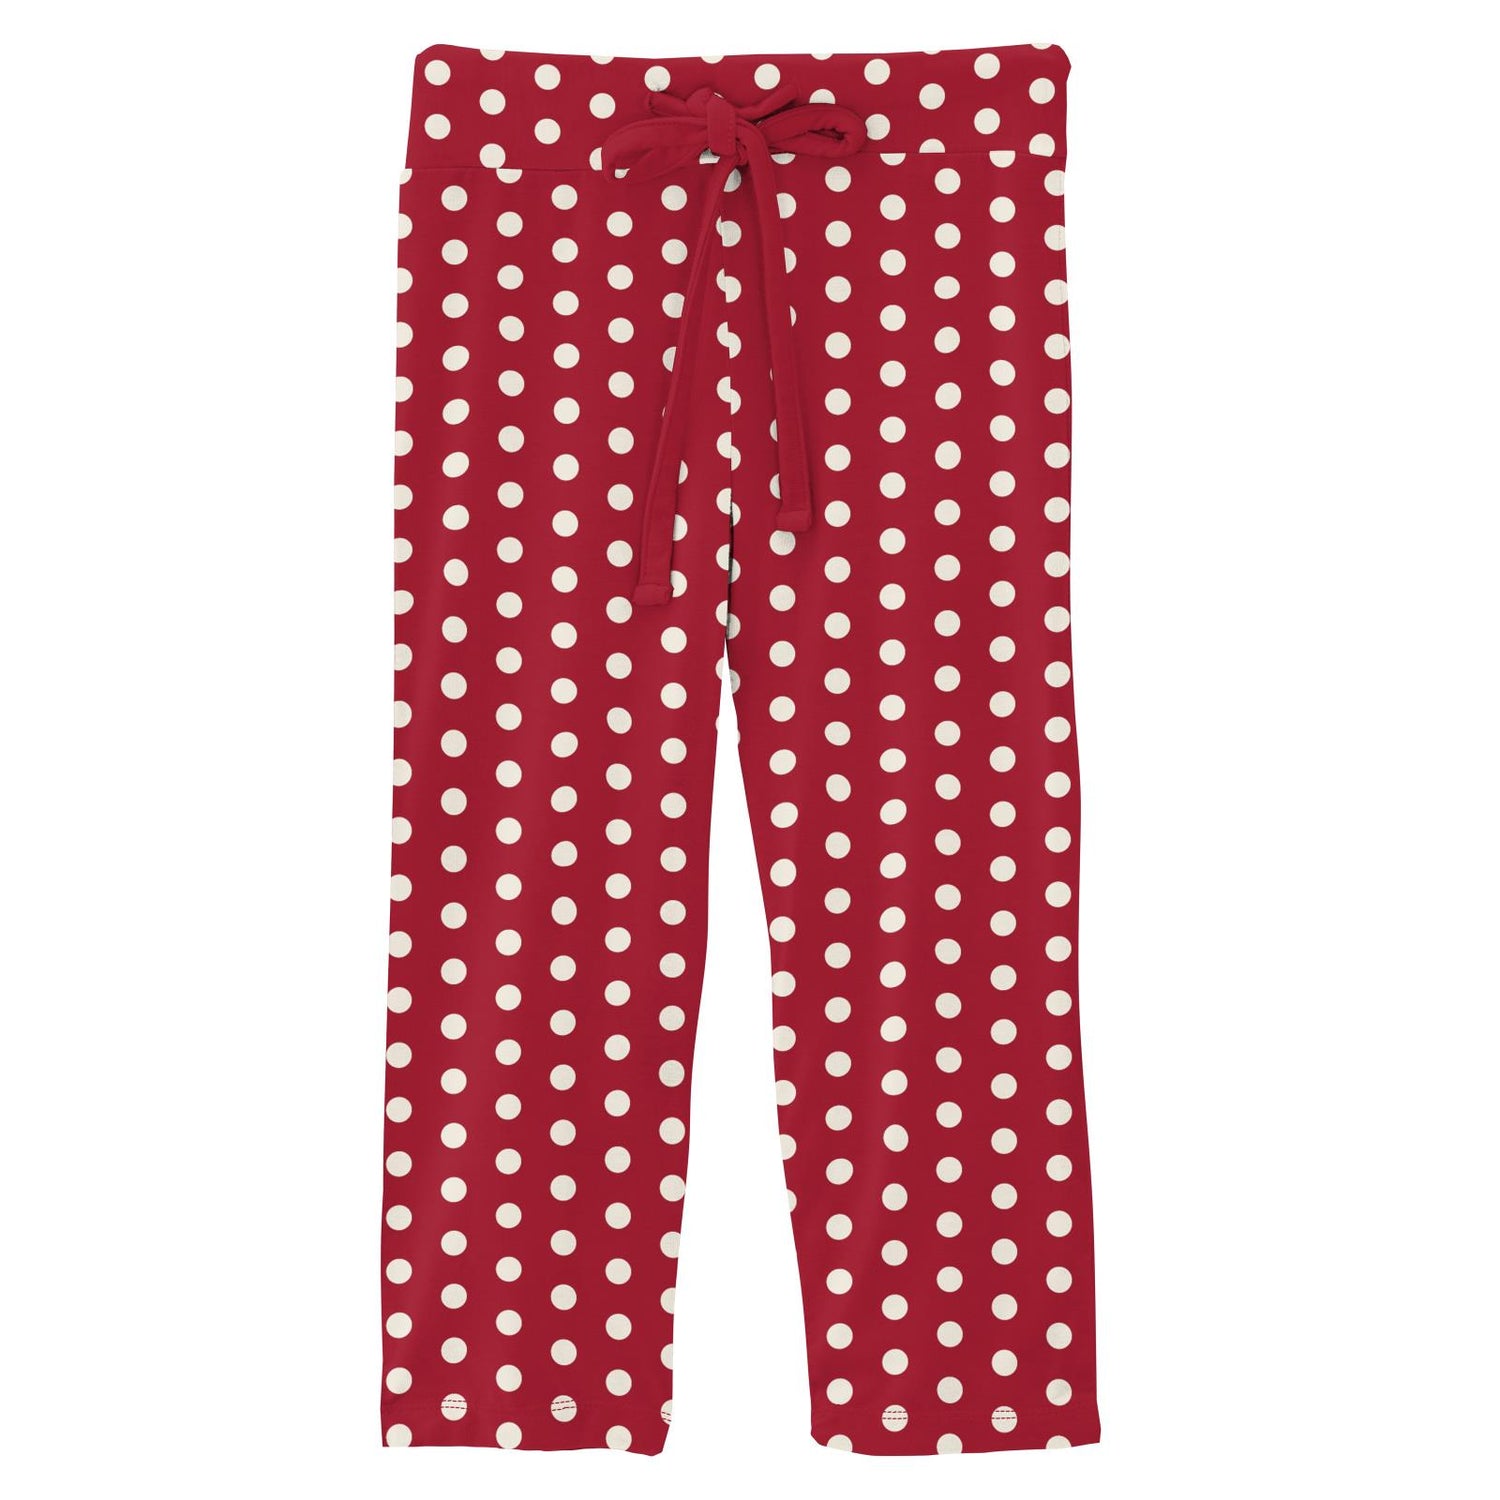 Print Relaxed Pants in Candy Apple Polka Dots